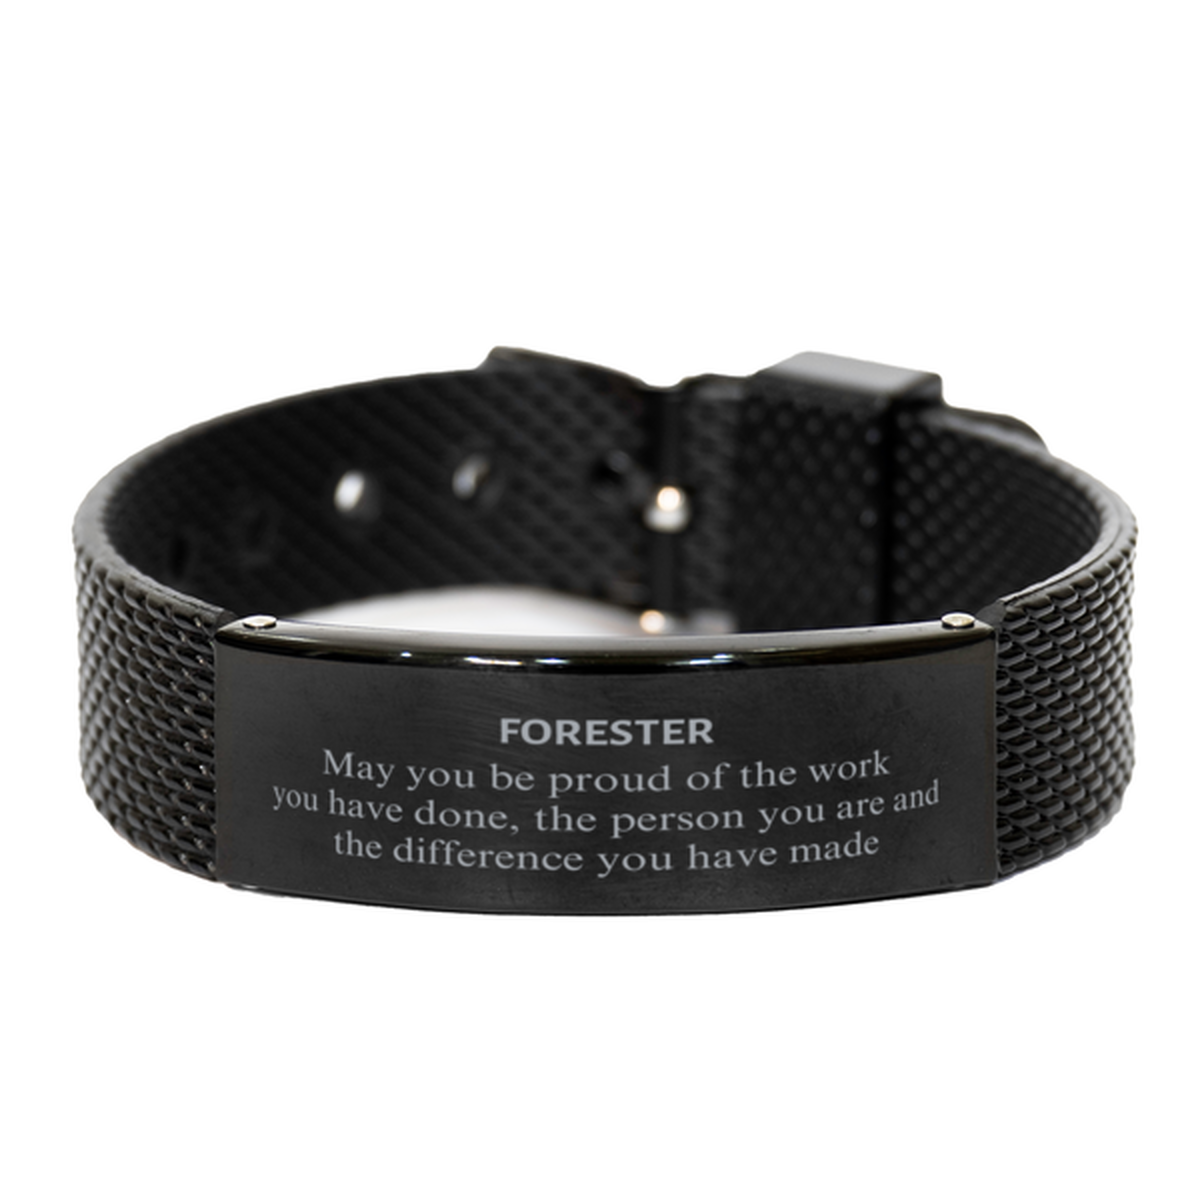 Forester May you be proud of the work you have done, Retirement Forester Black Shark Mesh Bracelet for Colleague Appreciation Gifts Amazing for Forester